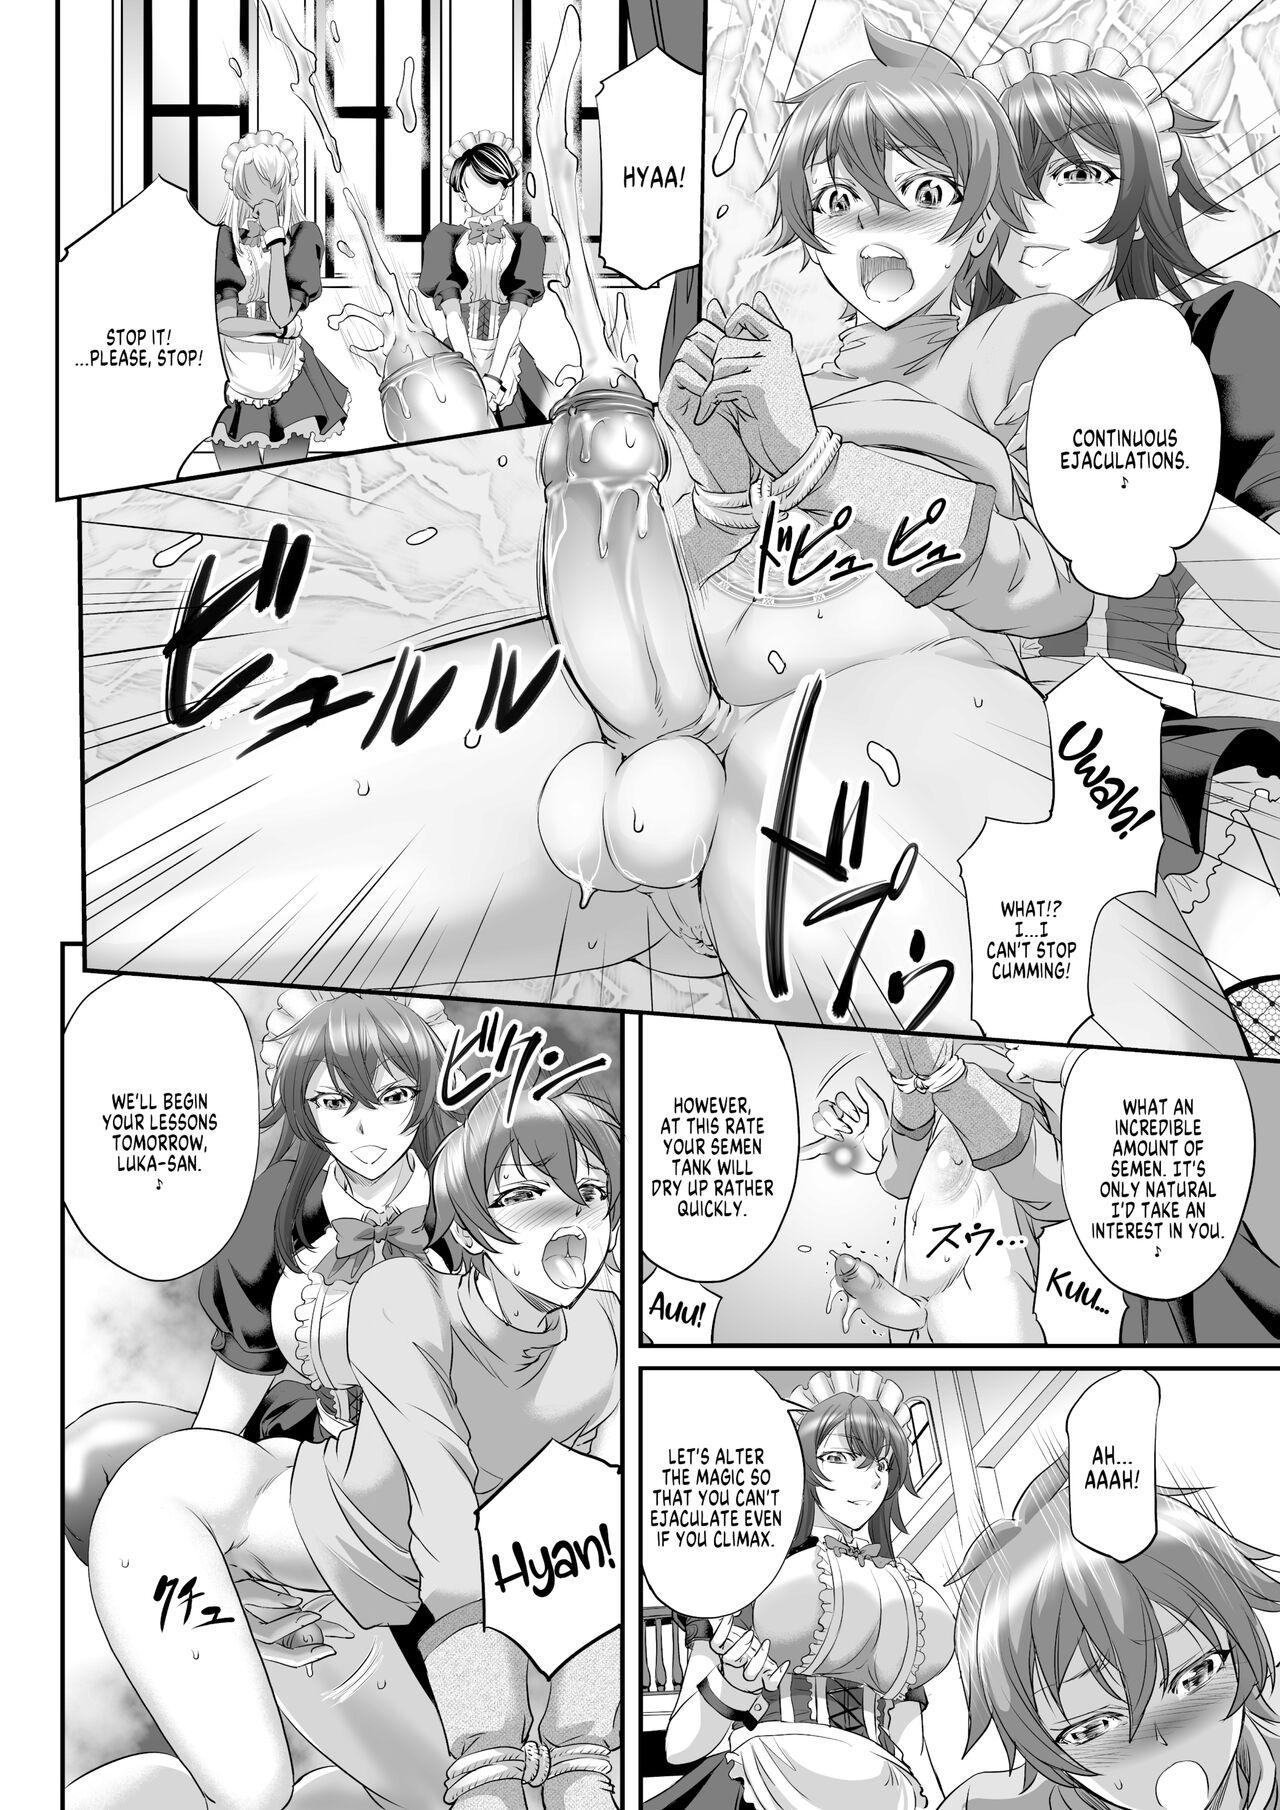 Gay Big Cock MonMusu Quest! ~ Luka no Maid Shugyou | Monster Girl Quest! Luka’s Maid Training - Monster girl quest Shy - Page 6